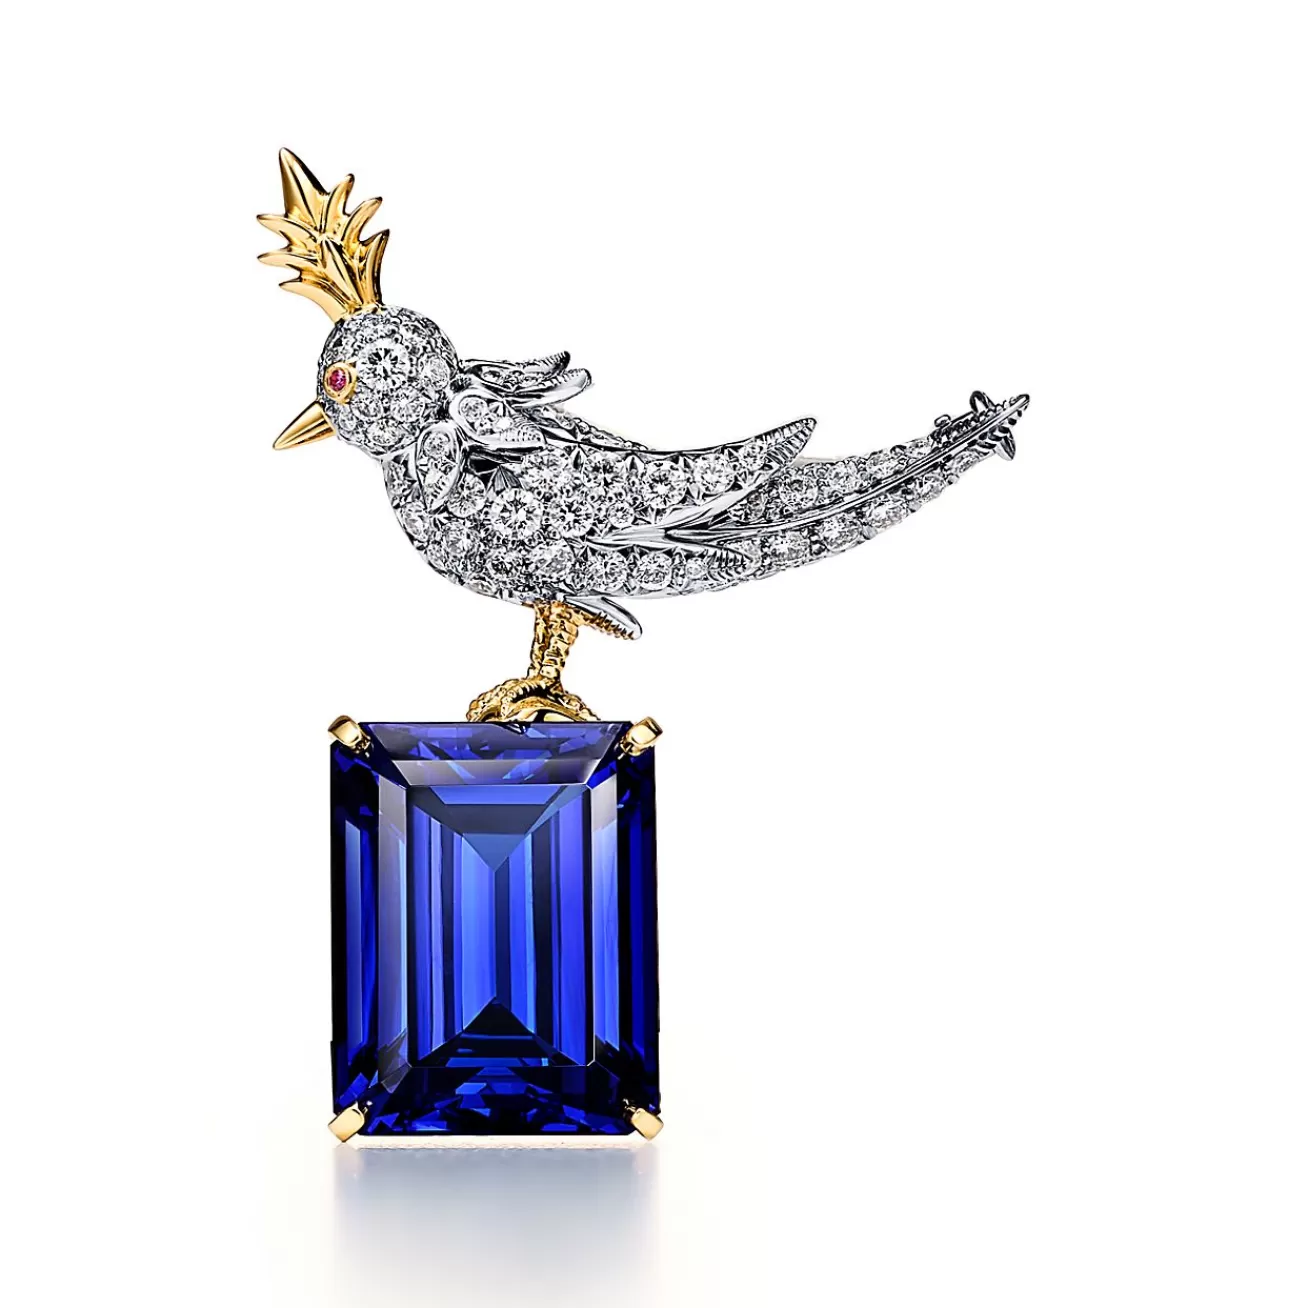 Tiffany & Co. Brooch in Gold and Platinum with a Tanzanite, Diamonds and a Pink Sapphire | ^ Brooches | Gold Jewelry